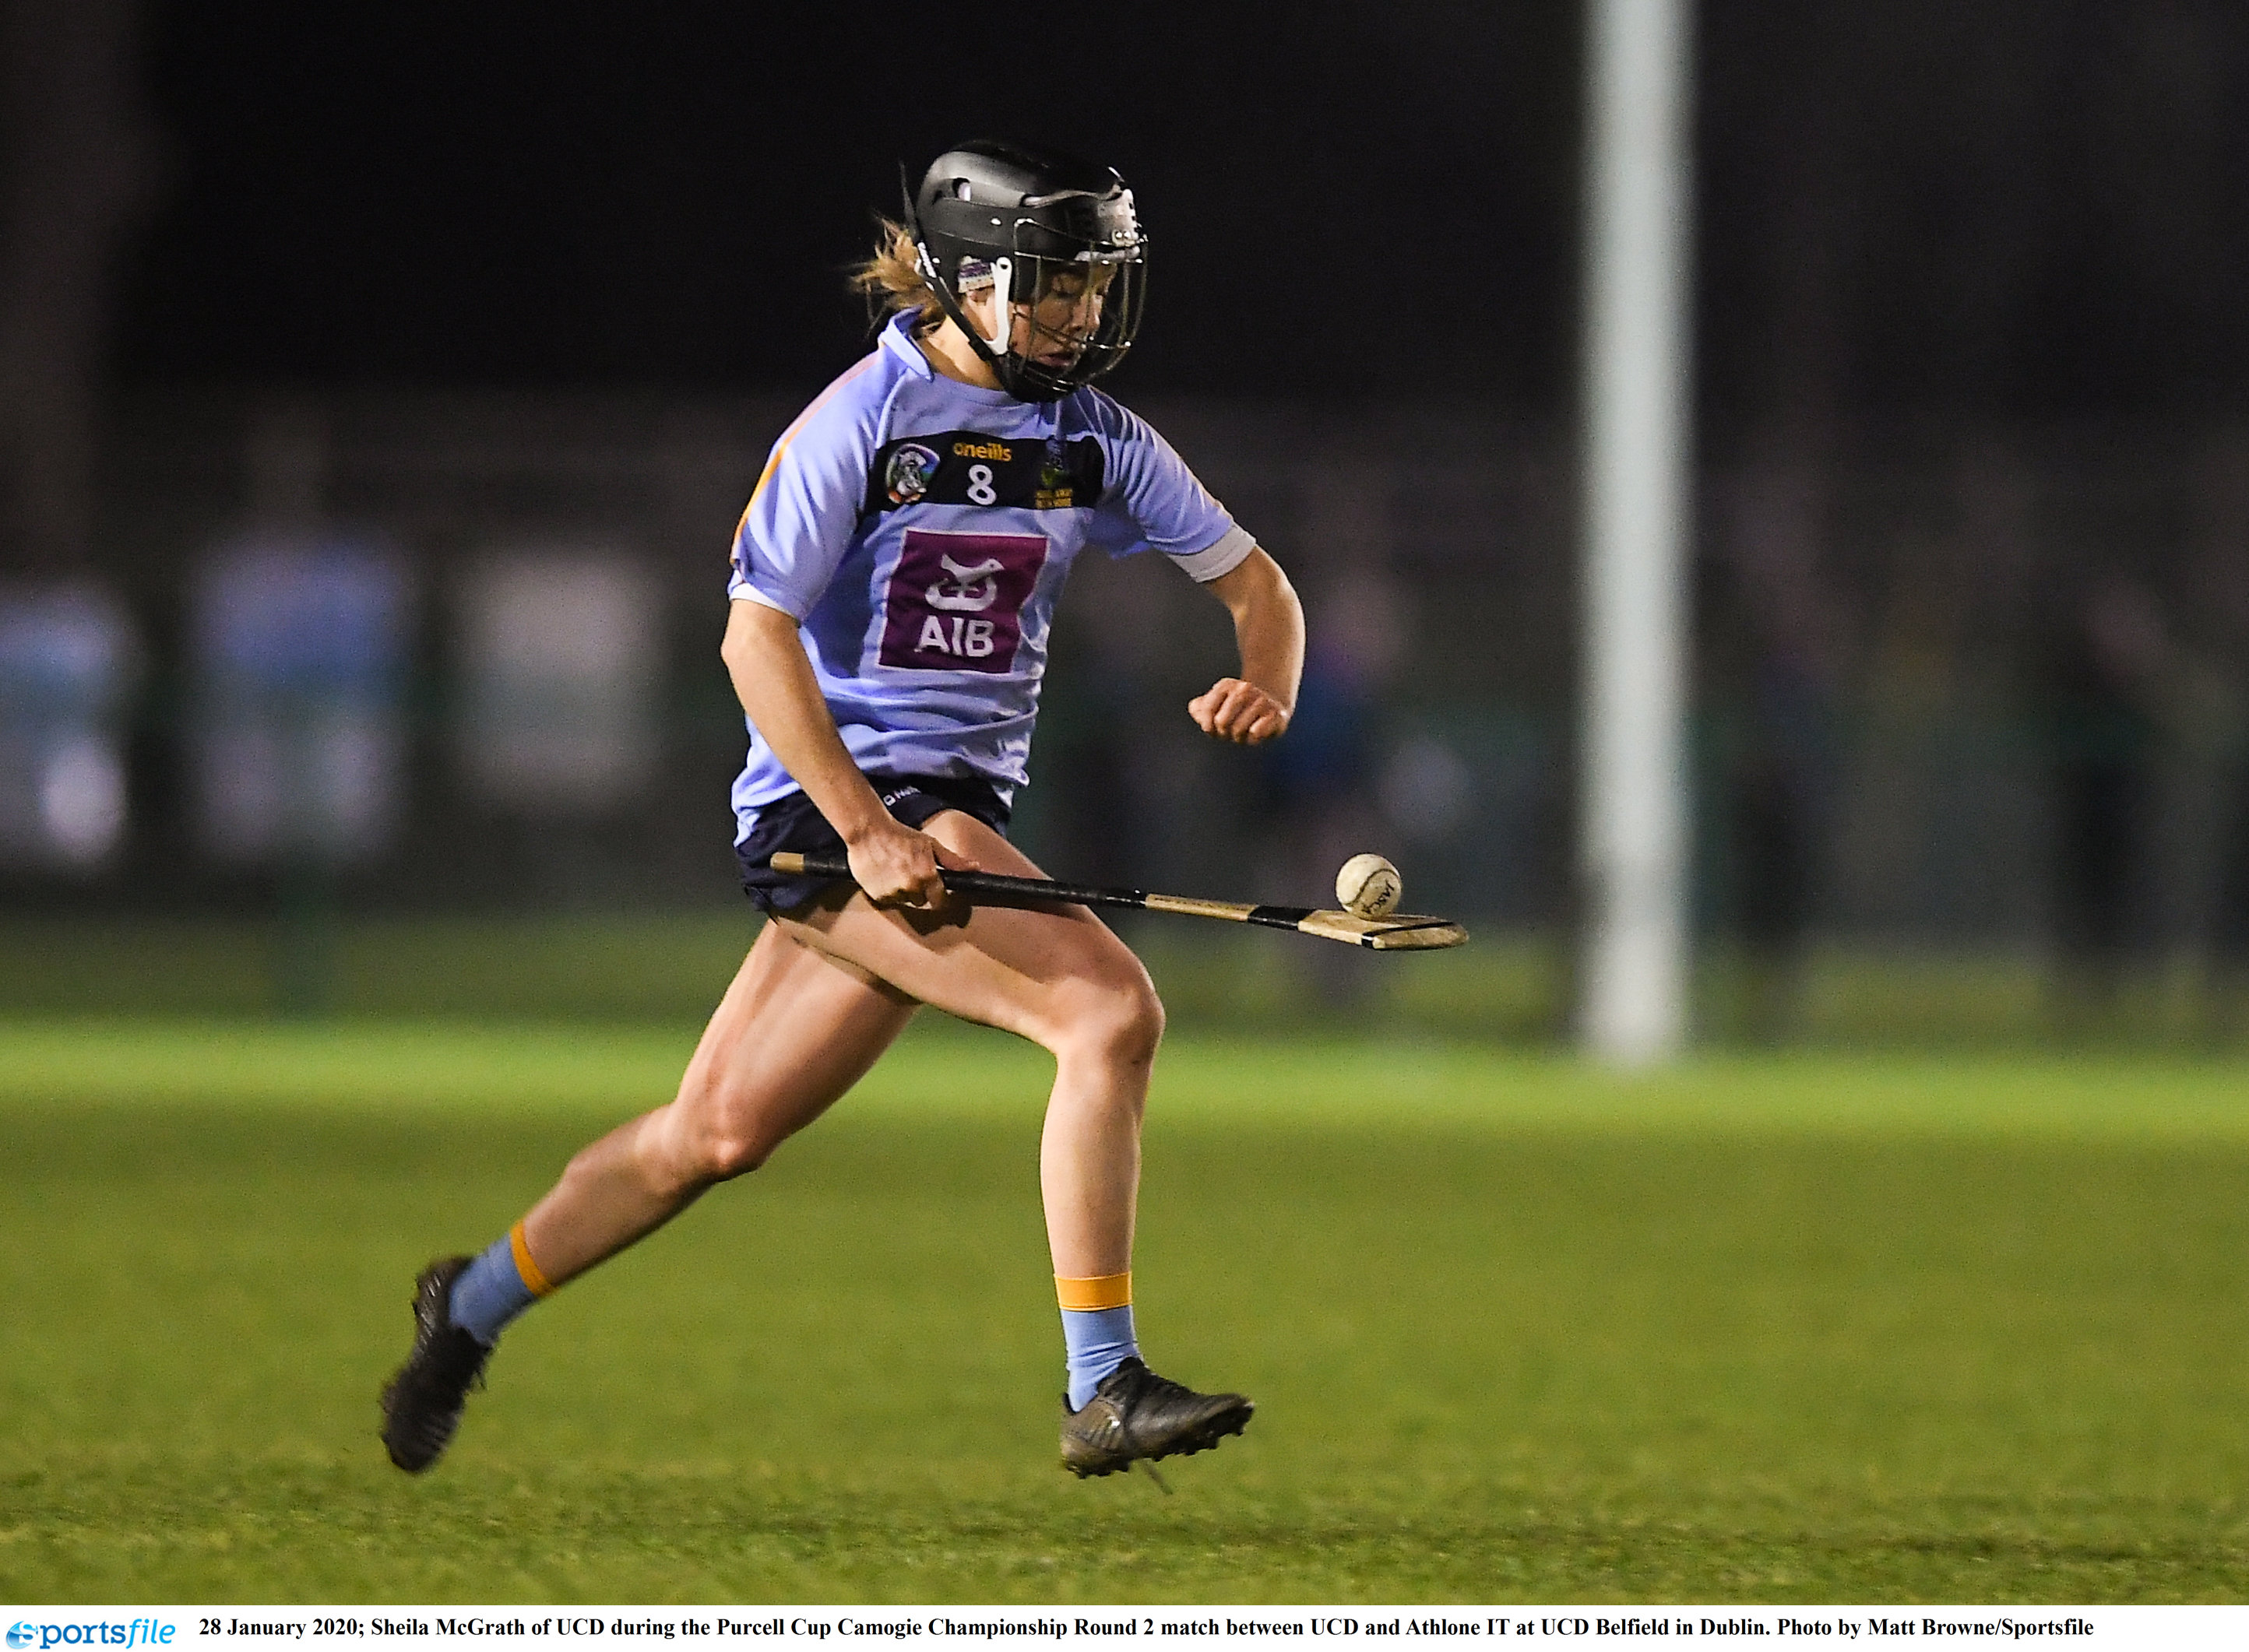 Click Here for more information on the UCD Camogie Club